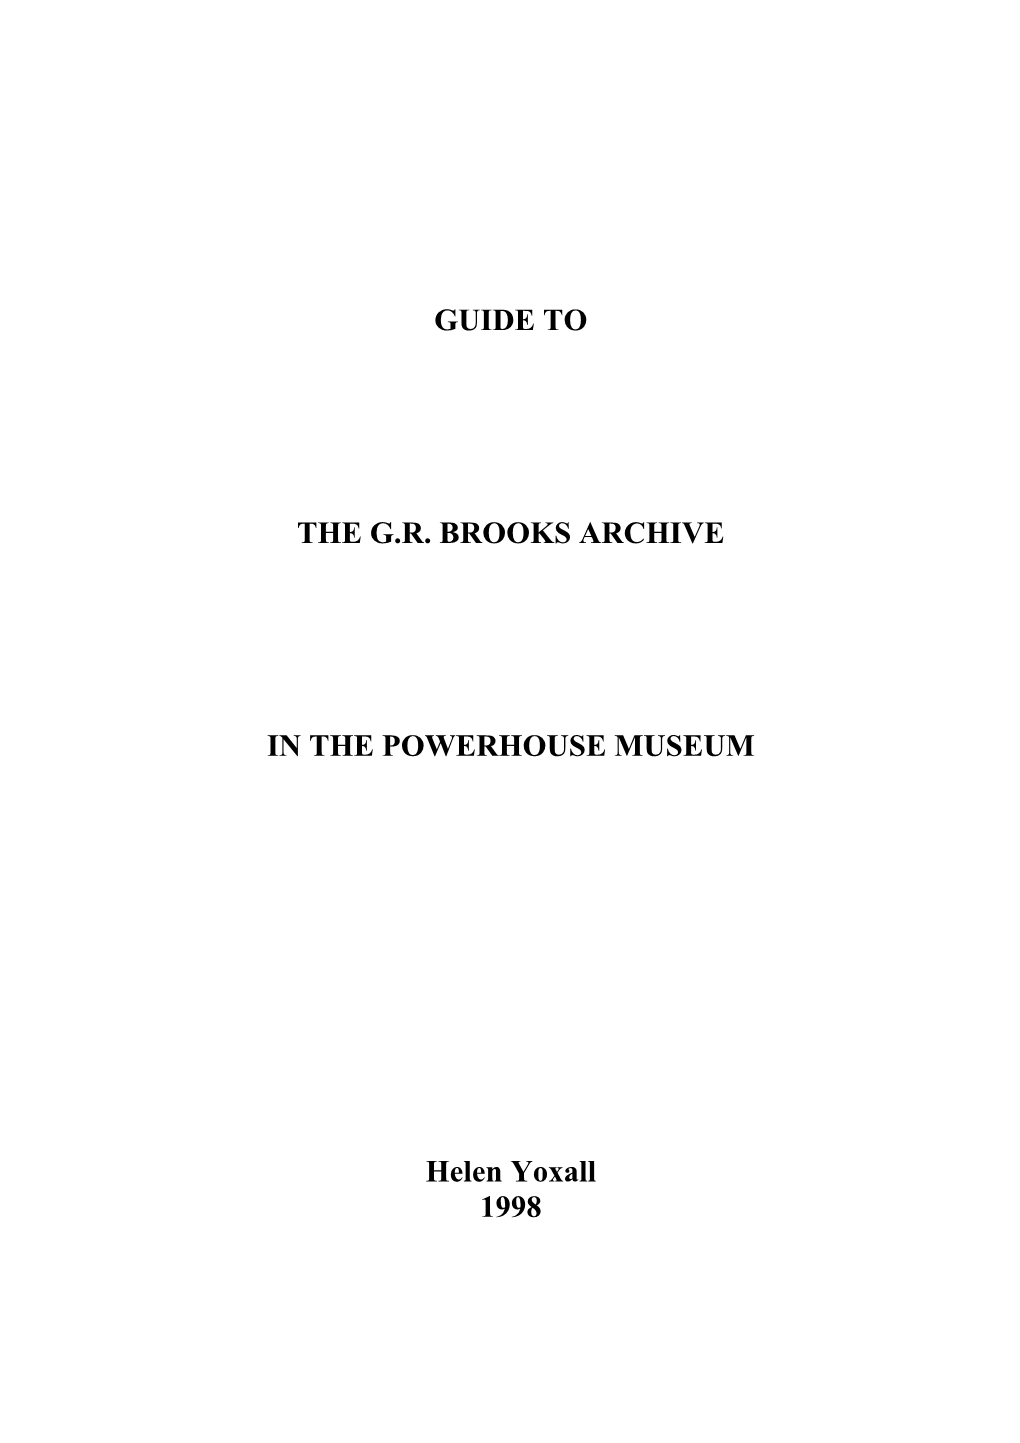 GUIDE to the G.R. BROOKS ARCHIVE in the POWERHOUSE MUSEUM Helen Yoxall 1998